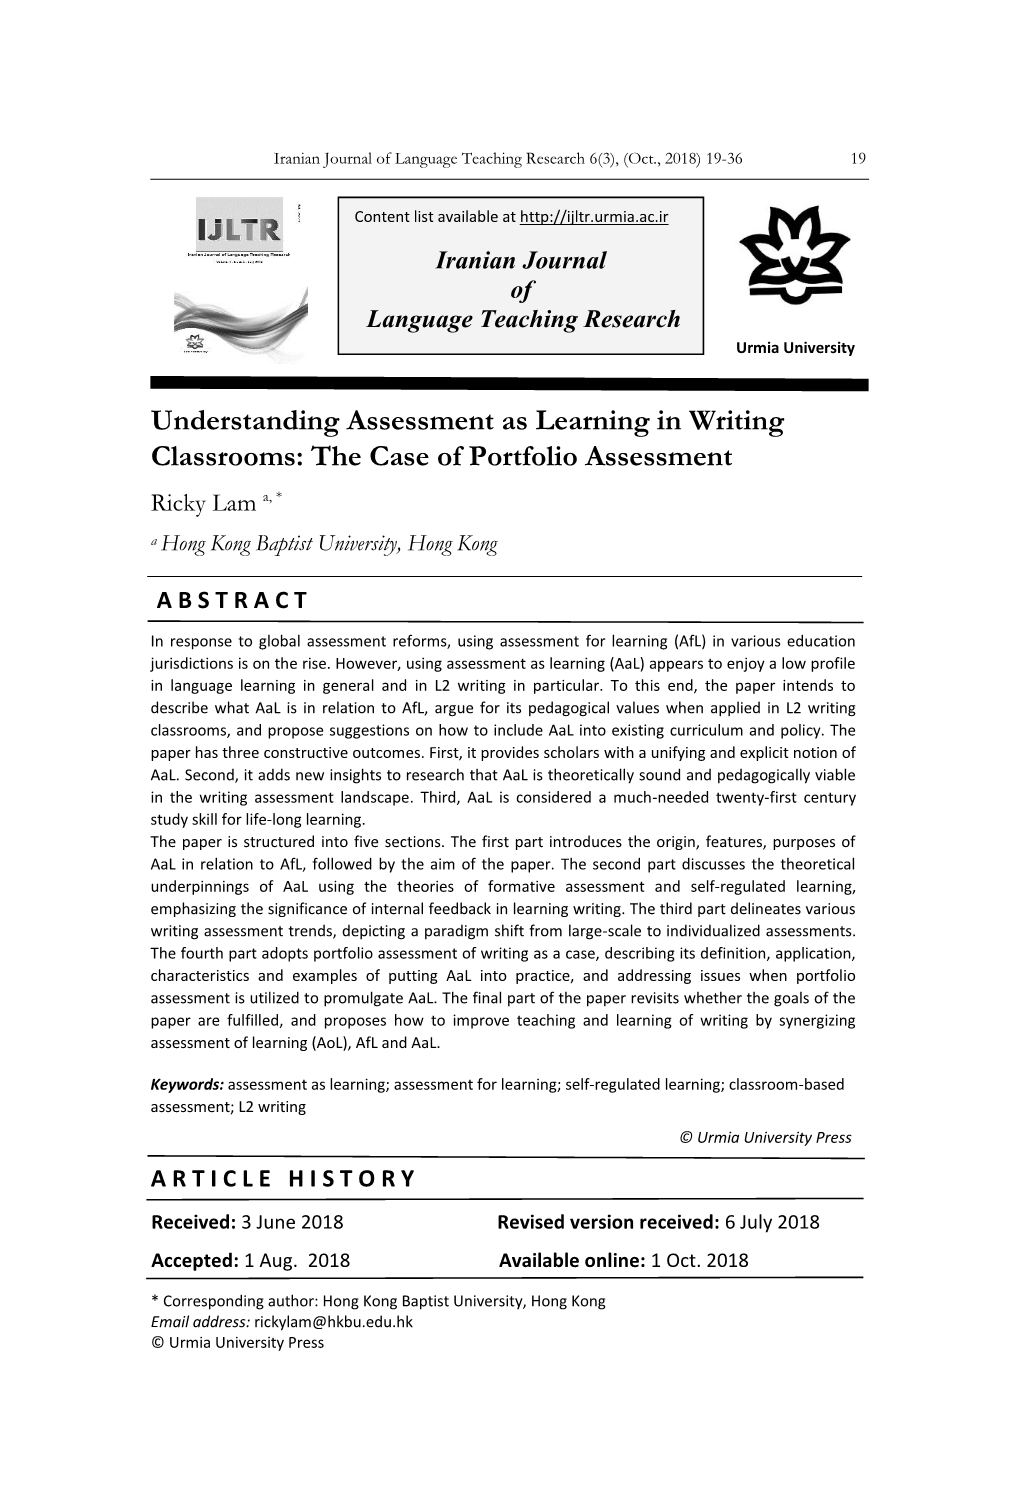 Understanding Assessment As Learning in Writing Classrooms: the Case of Portfolio Assessment Ricky Lam A, * a Hong Kong Baptist University, Hong Kong